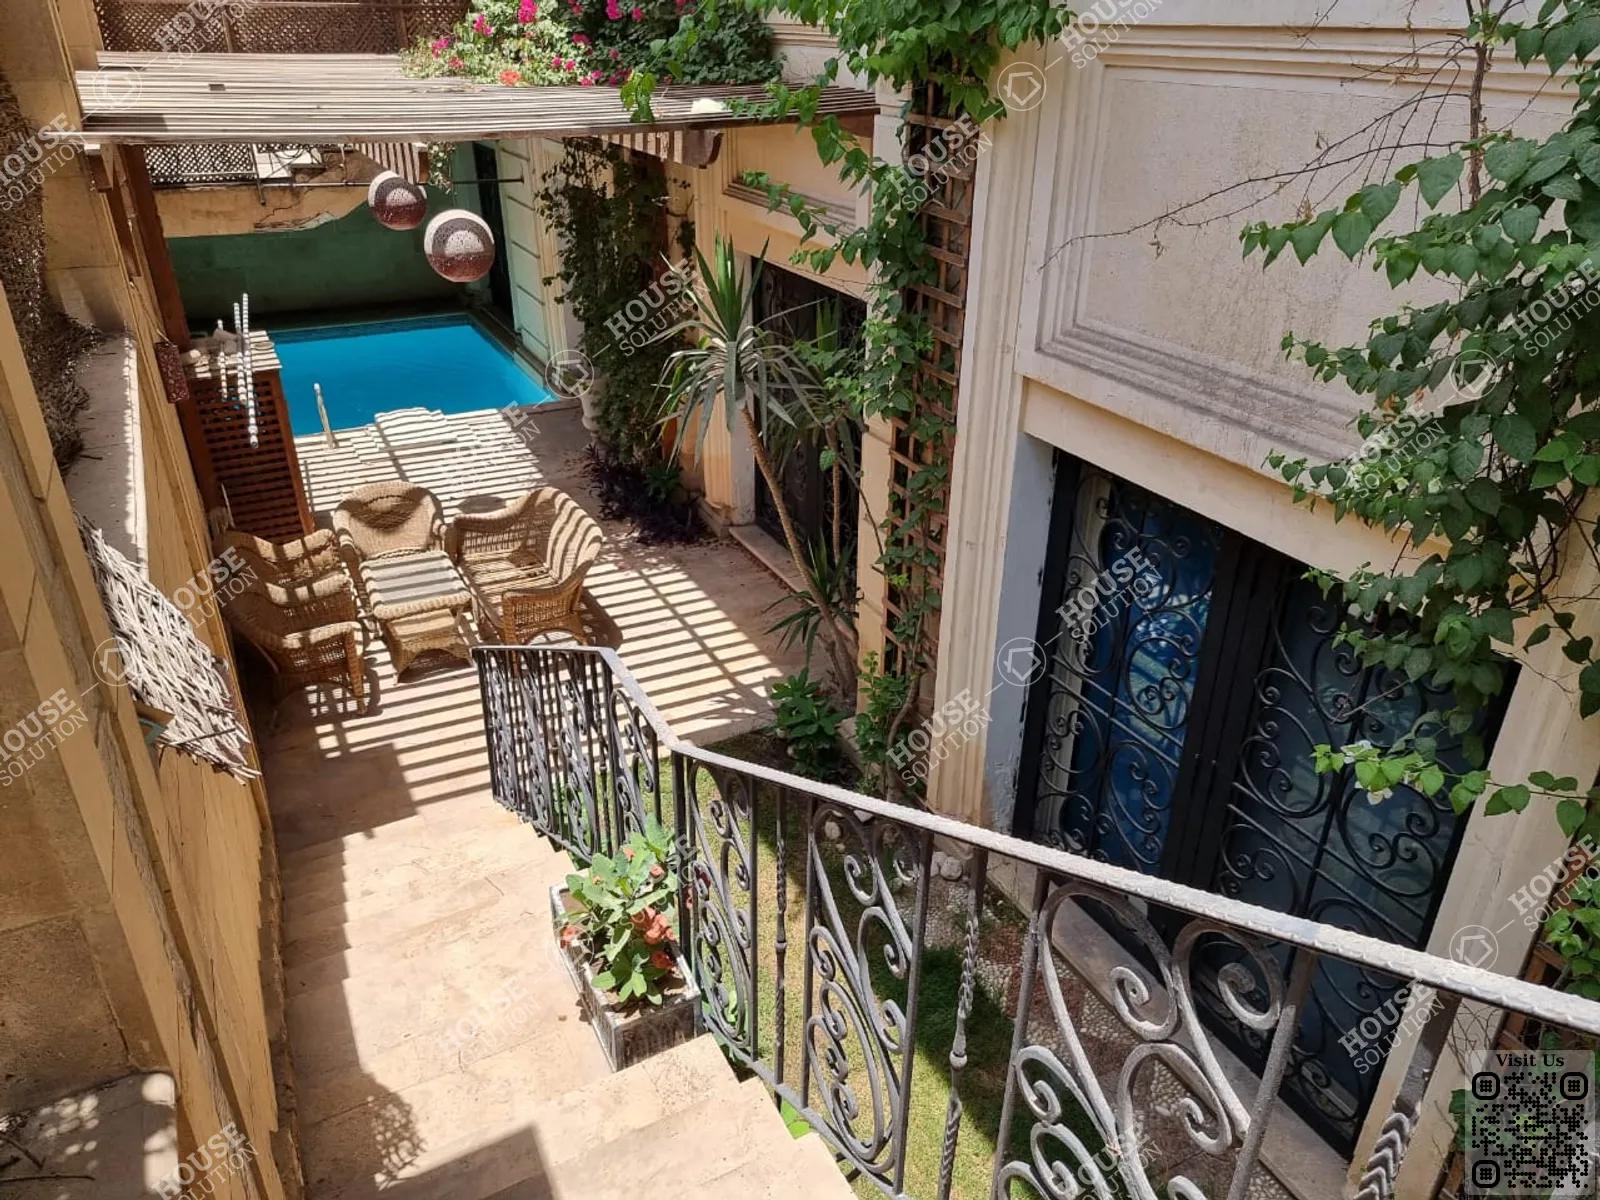 PRIVATE SWIMMING POOL  @ Ground Floors For Rent In Maadi Maadi Degla Area: 305 m² consists of 4 Bedrooms 4 Bathrooms Modern furnished 5 stars #5497-0